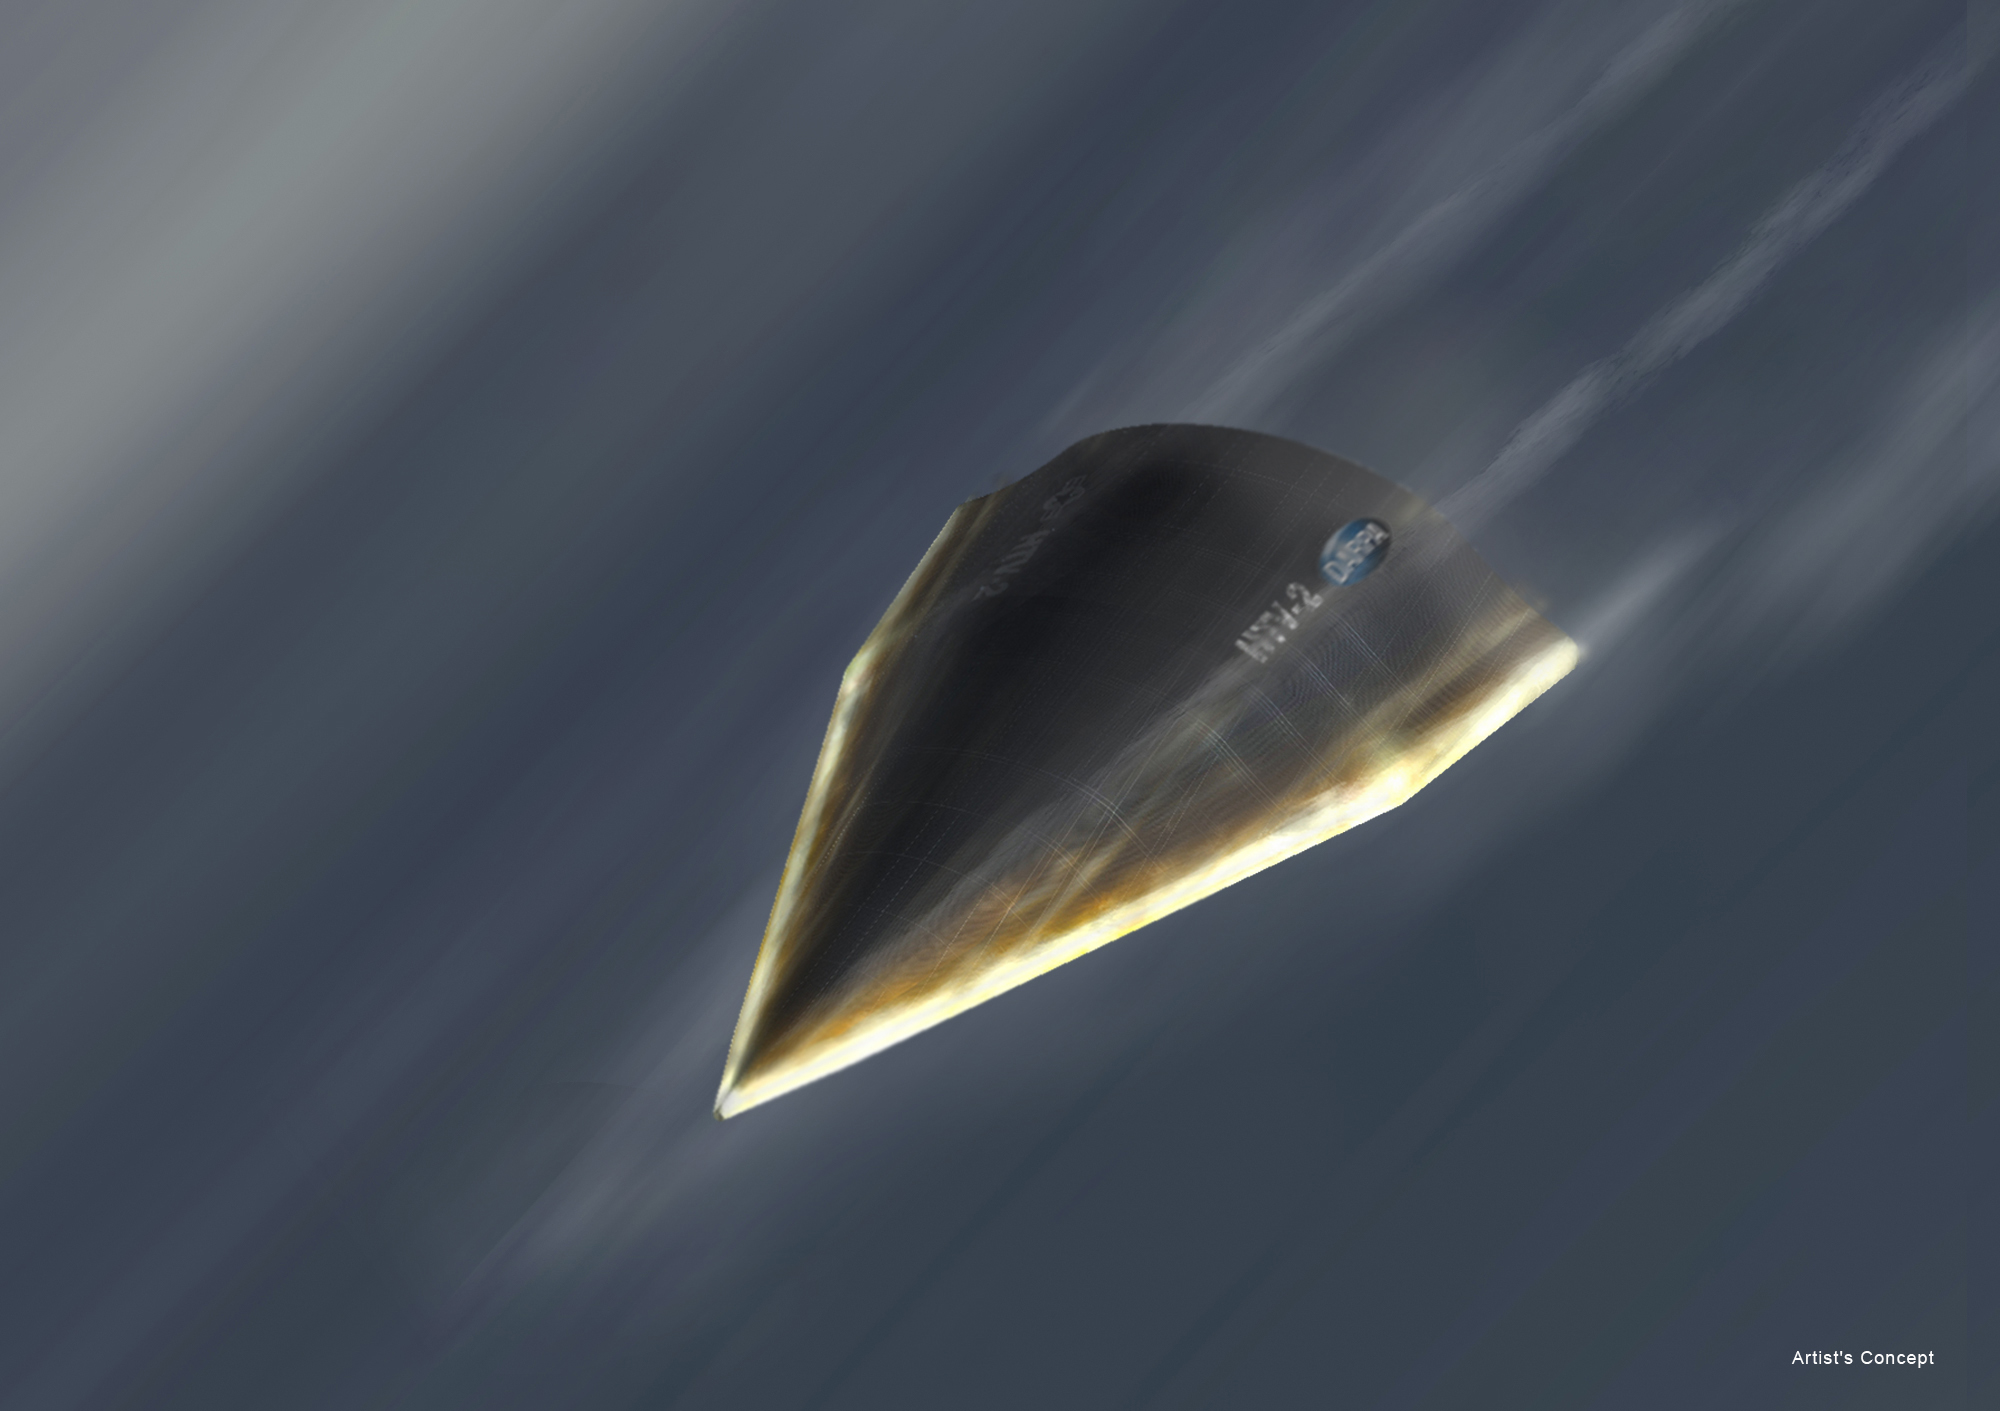 DARPA's Hypersonic Technology Vehicle - So Fast Its Own Skin Peeled Off